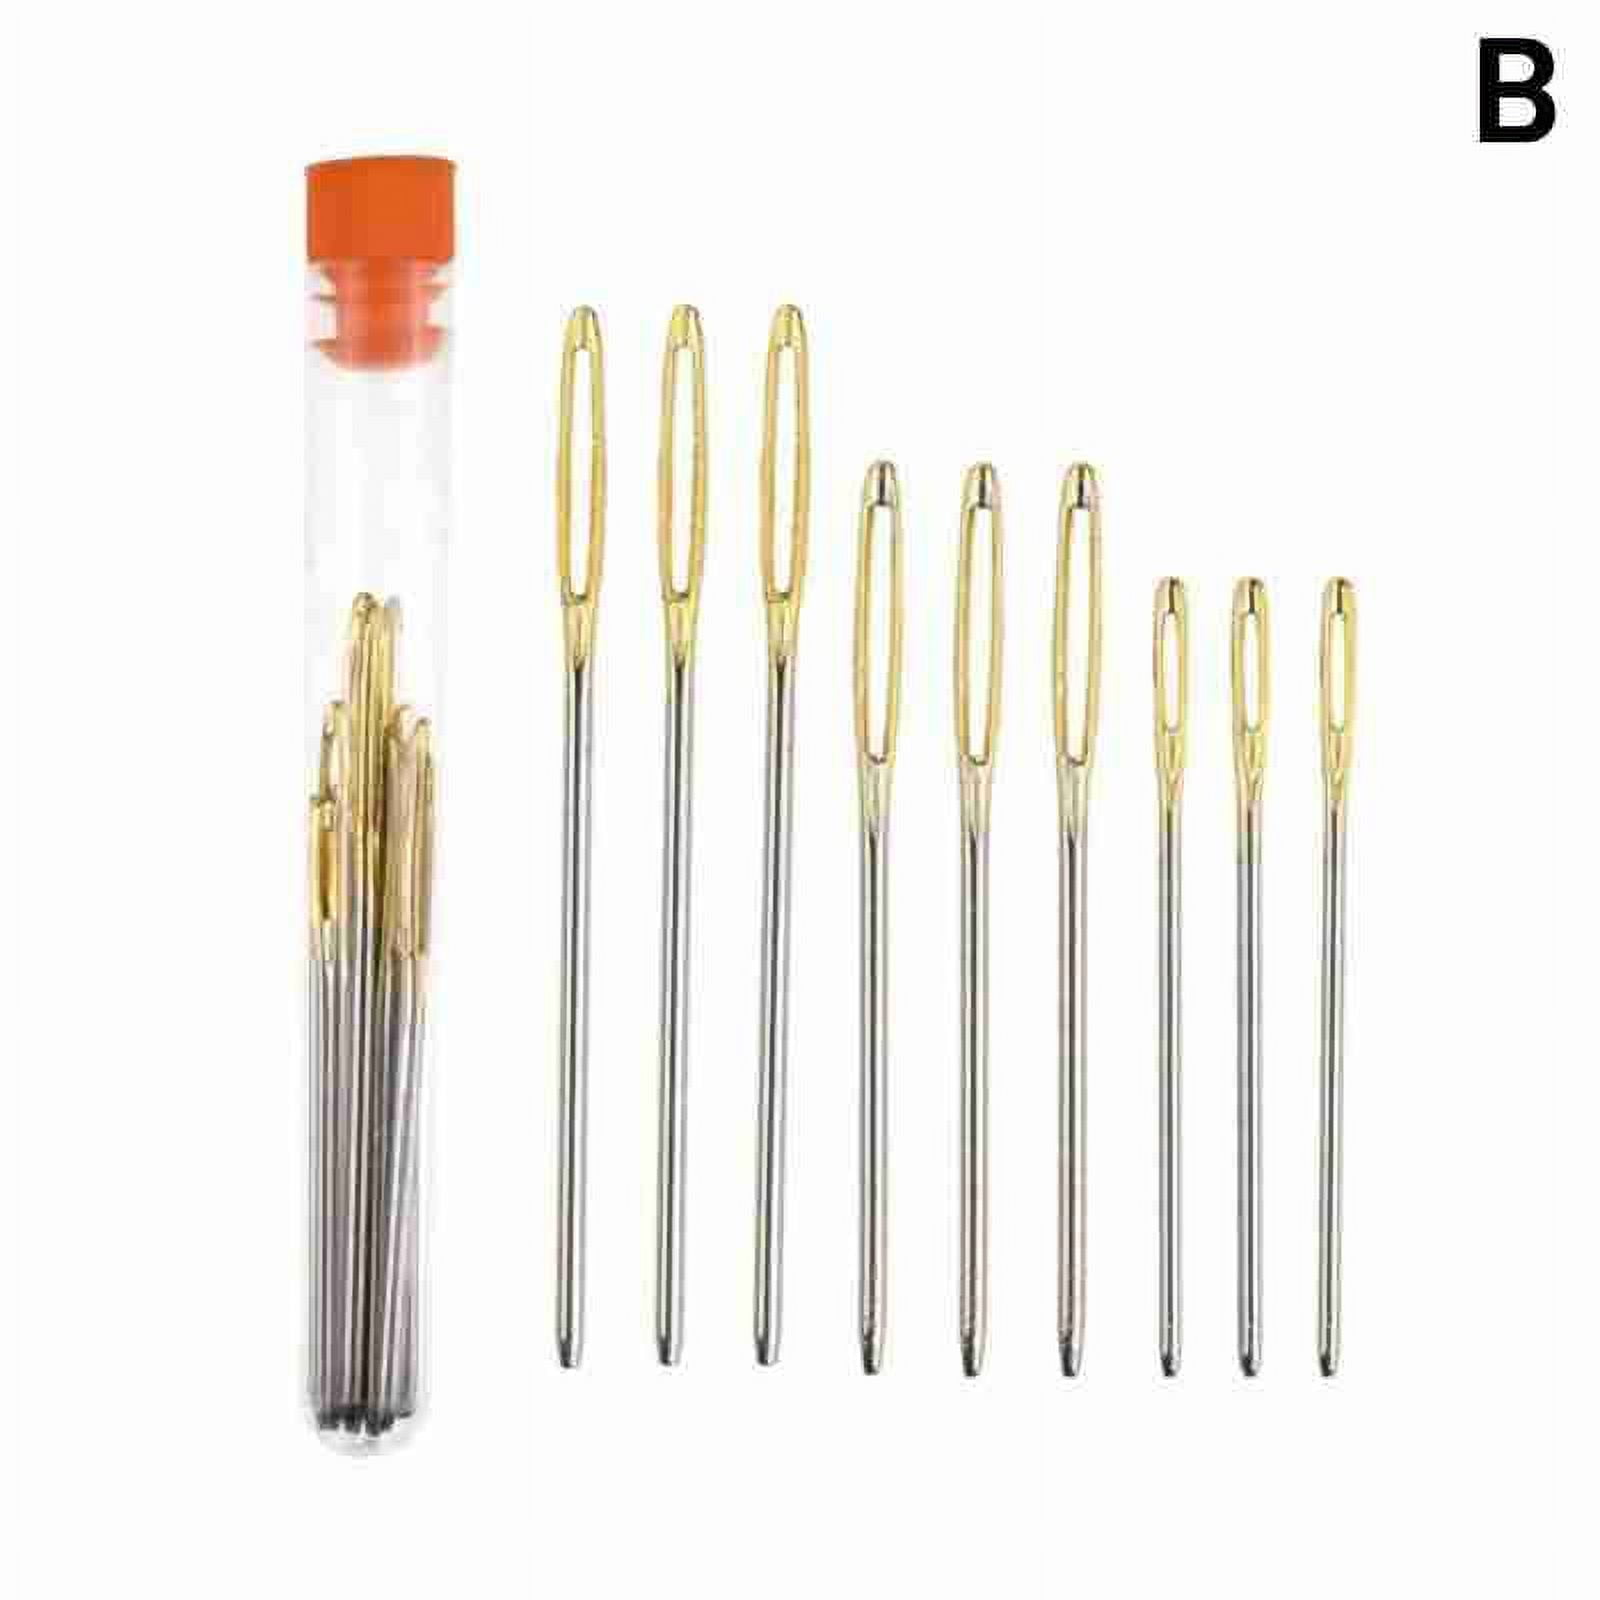 9 Pieces Large-Eye Hand Sewing Needles, Steel Yarn Knitting Needles Sewing Needles Darning Needle with Clear Storage Tube for Embroidery Tool Hand